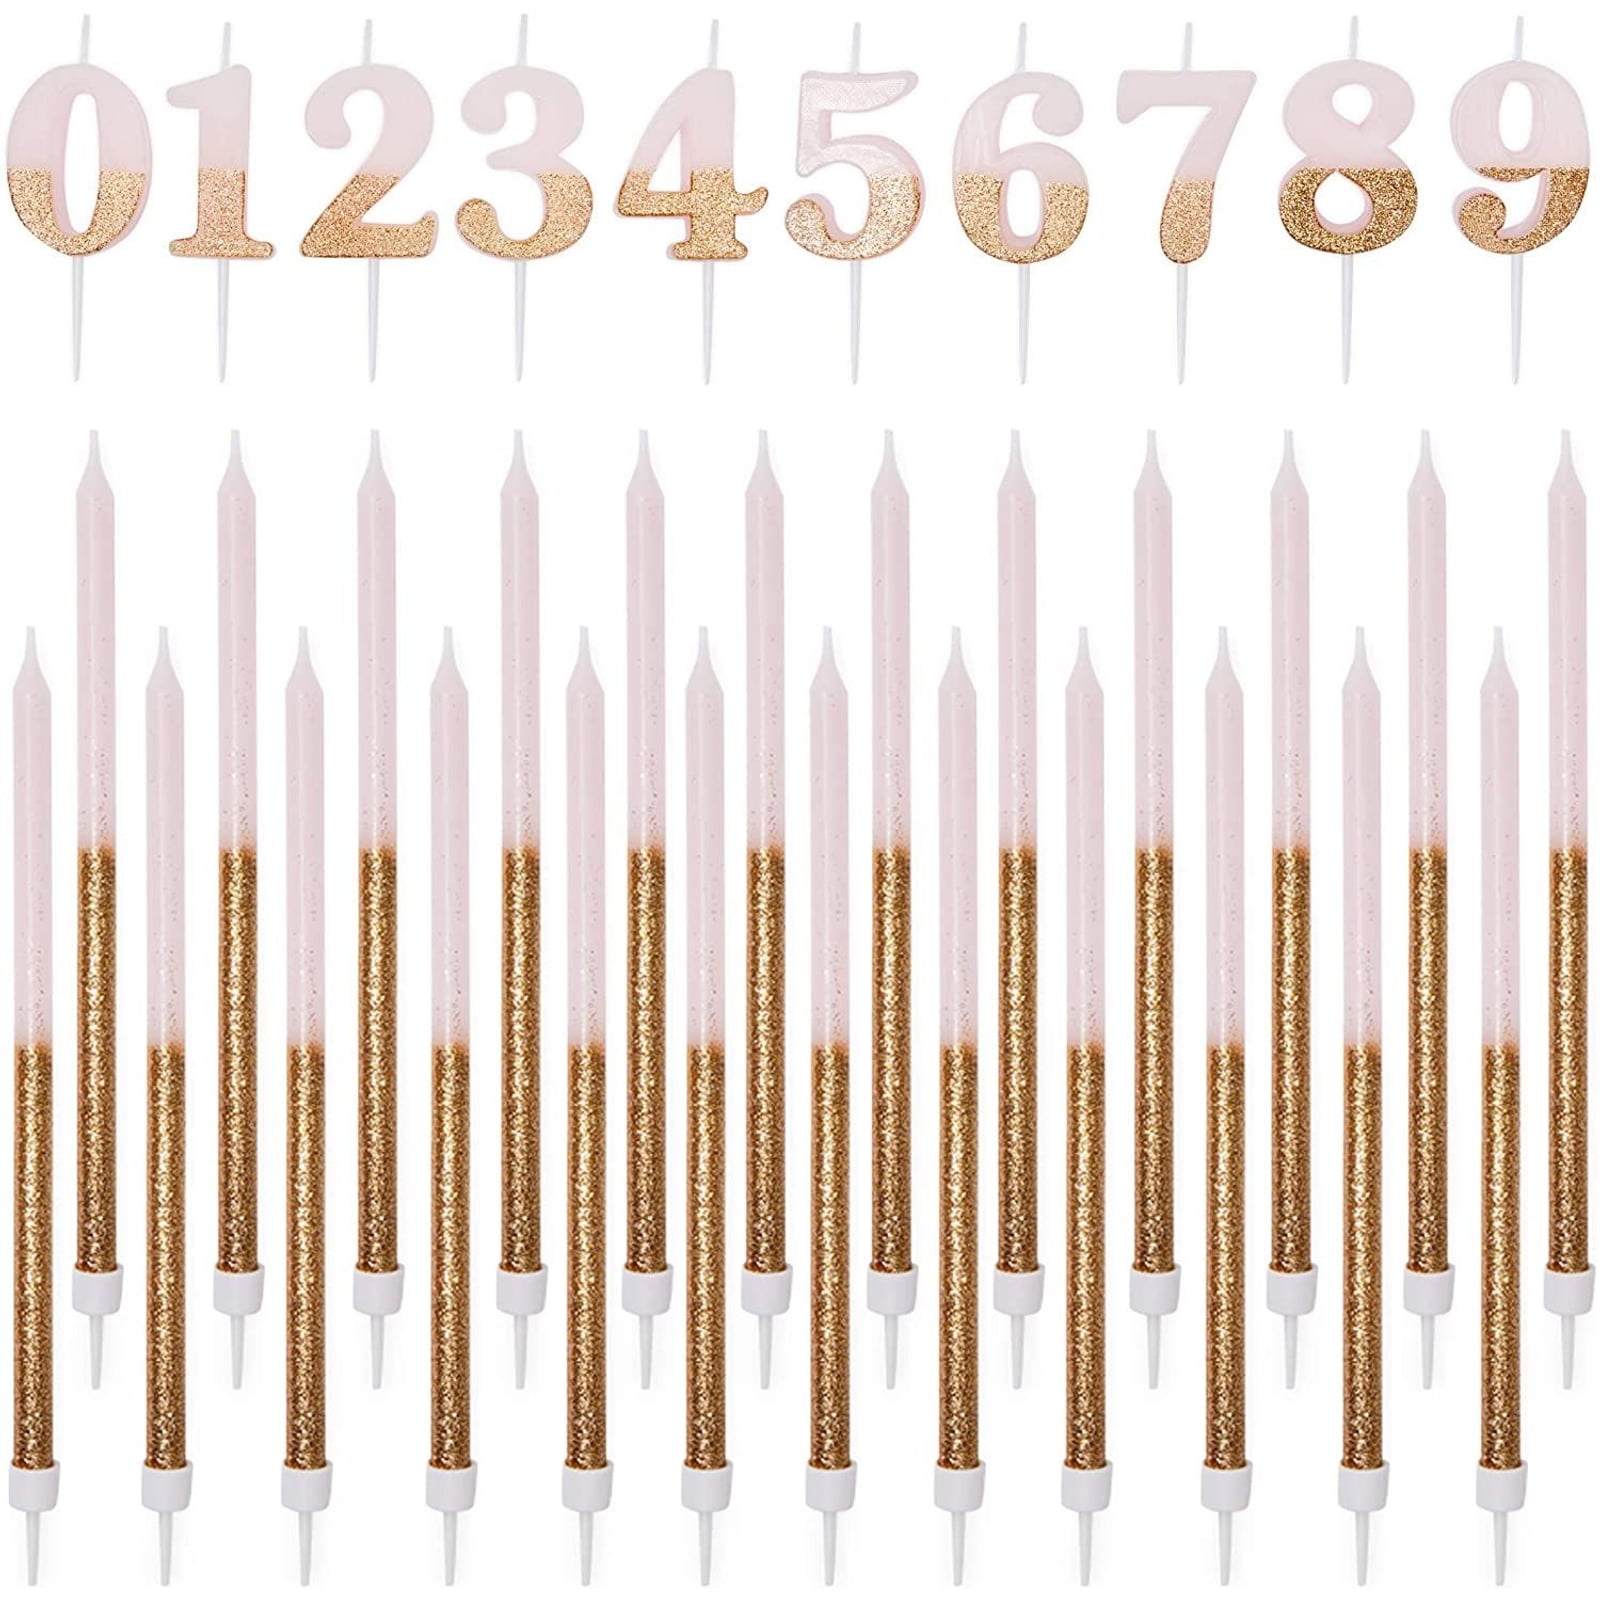 Gold 0-9 Numbers Candles Birthday Anniversary Party Cake Decorations Topper 